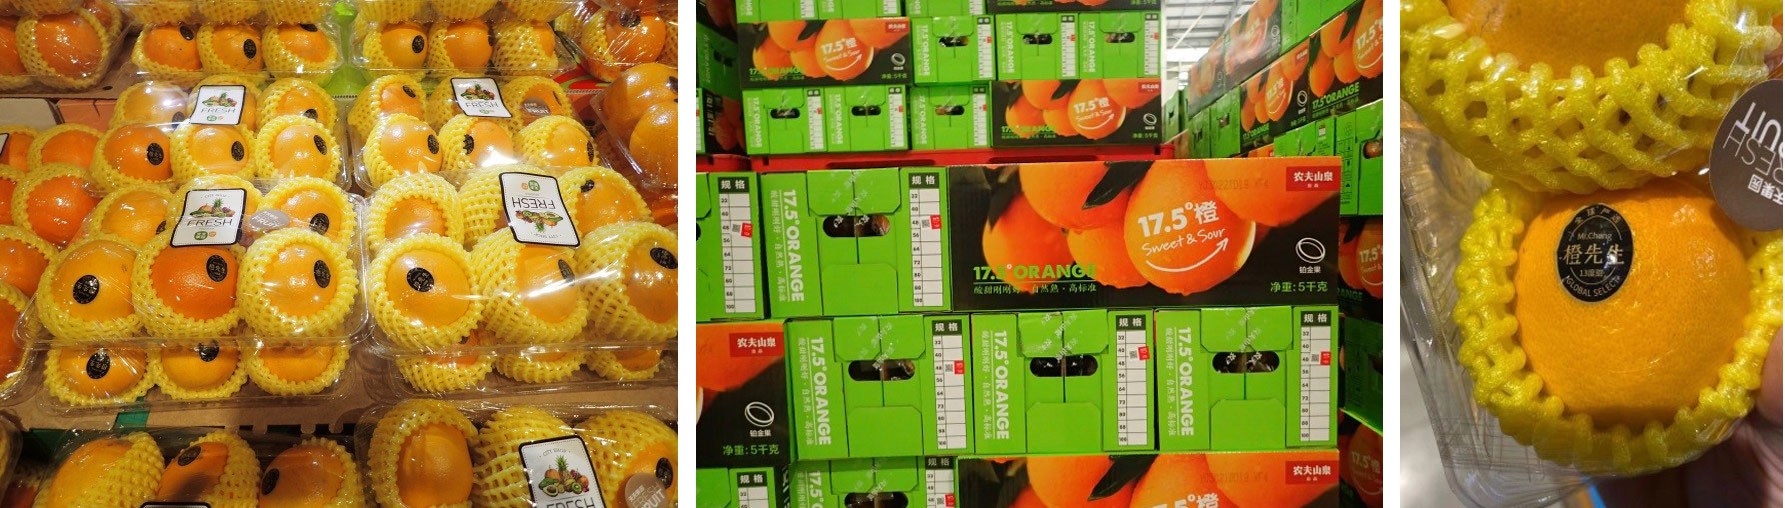 Figure 2. Left ‘Mr Cheng’ and middle Nongfu Spring ‘17.5o Orange’ are two examples of Chinese orange brands that guaranteed sweetness. Right: the 5 kg box of Platinum grade ‘17.5° Orange’ brand sold for 138 rmb ($6.00 AUD/kg).